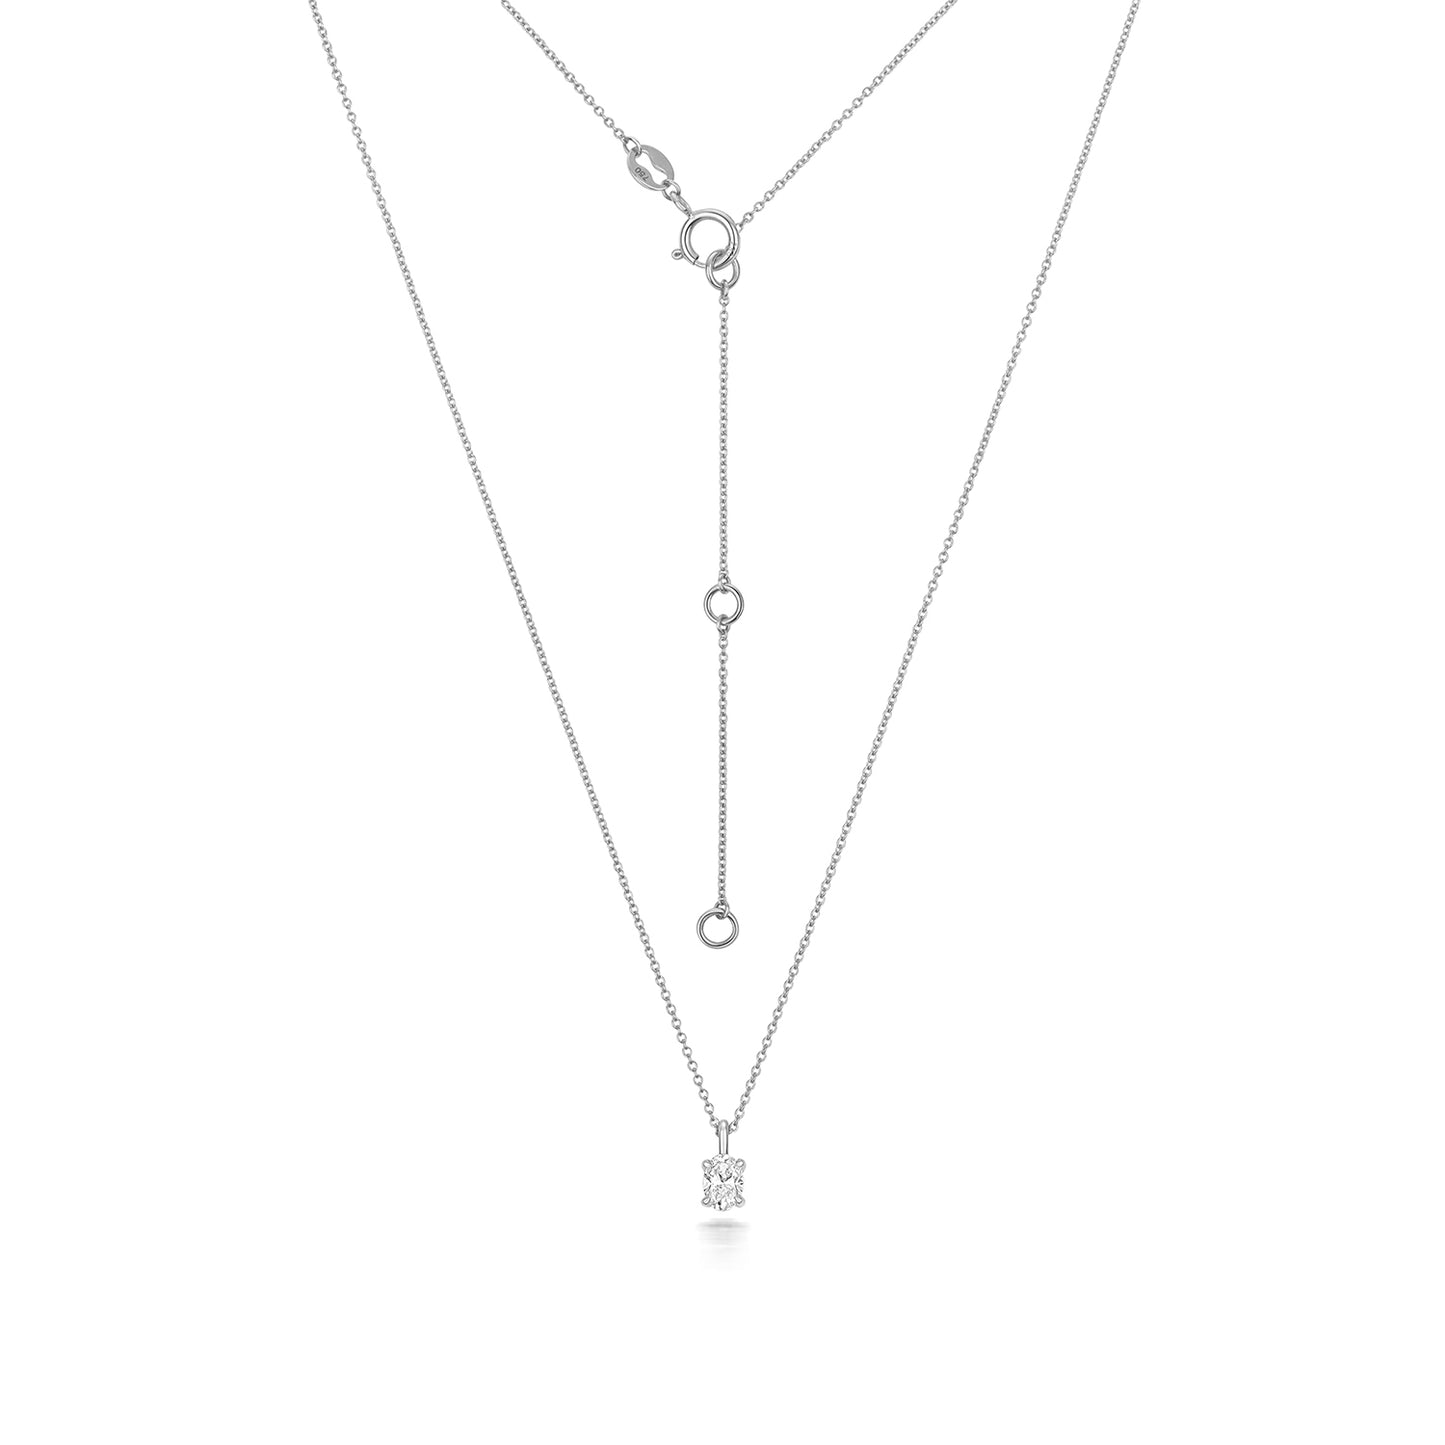 Oval Shaped Diamond Necklace in White Gold with adjustable chain on white background.